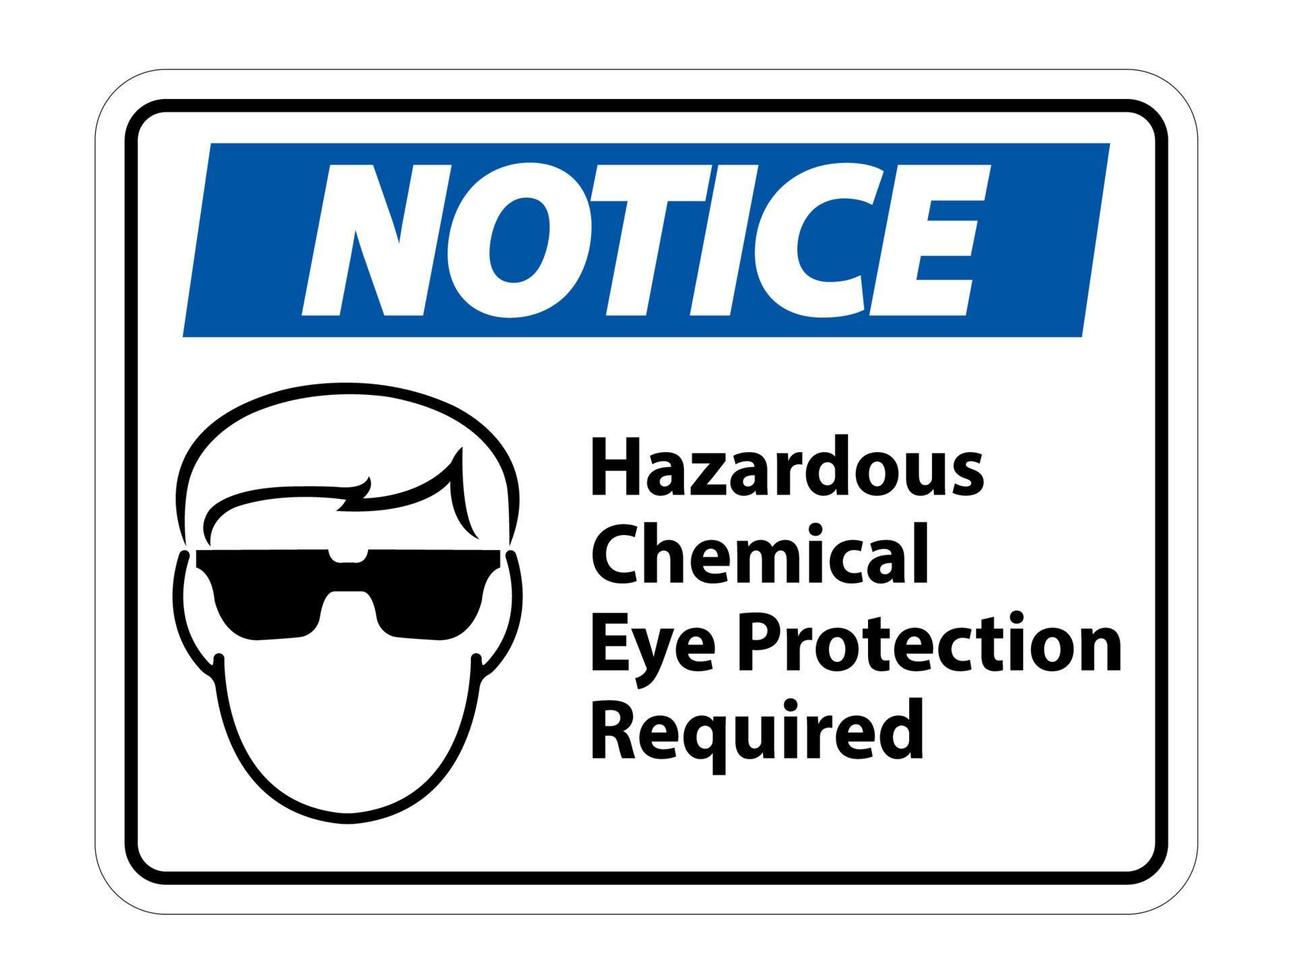 Hazardous Chemical Eye Protection Required Symbol Sign Isolate on White Background vector